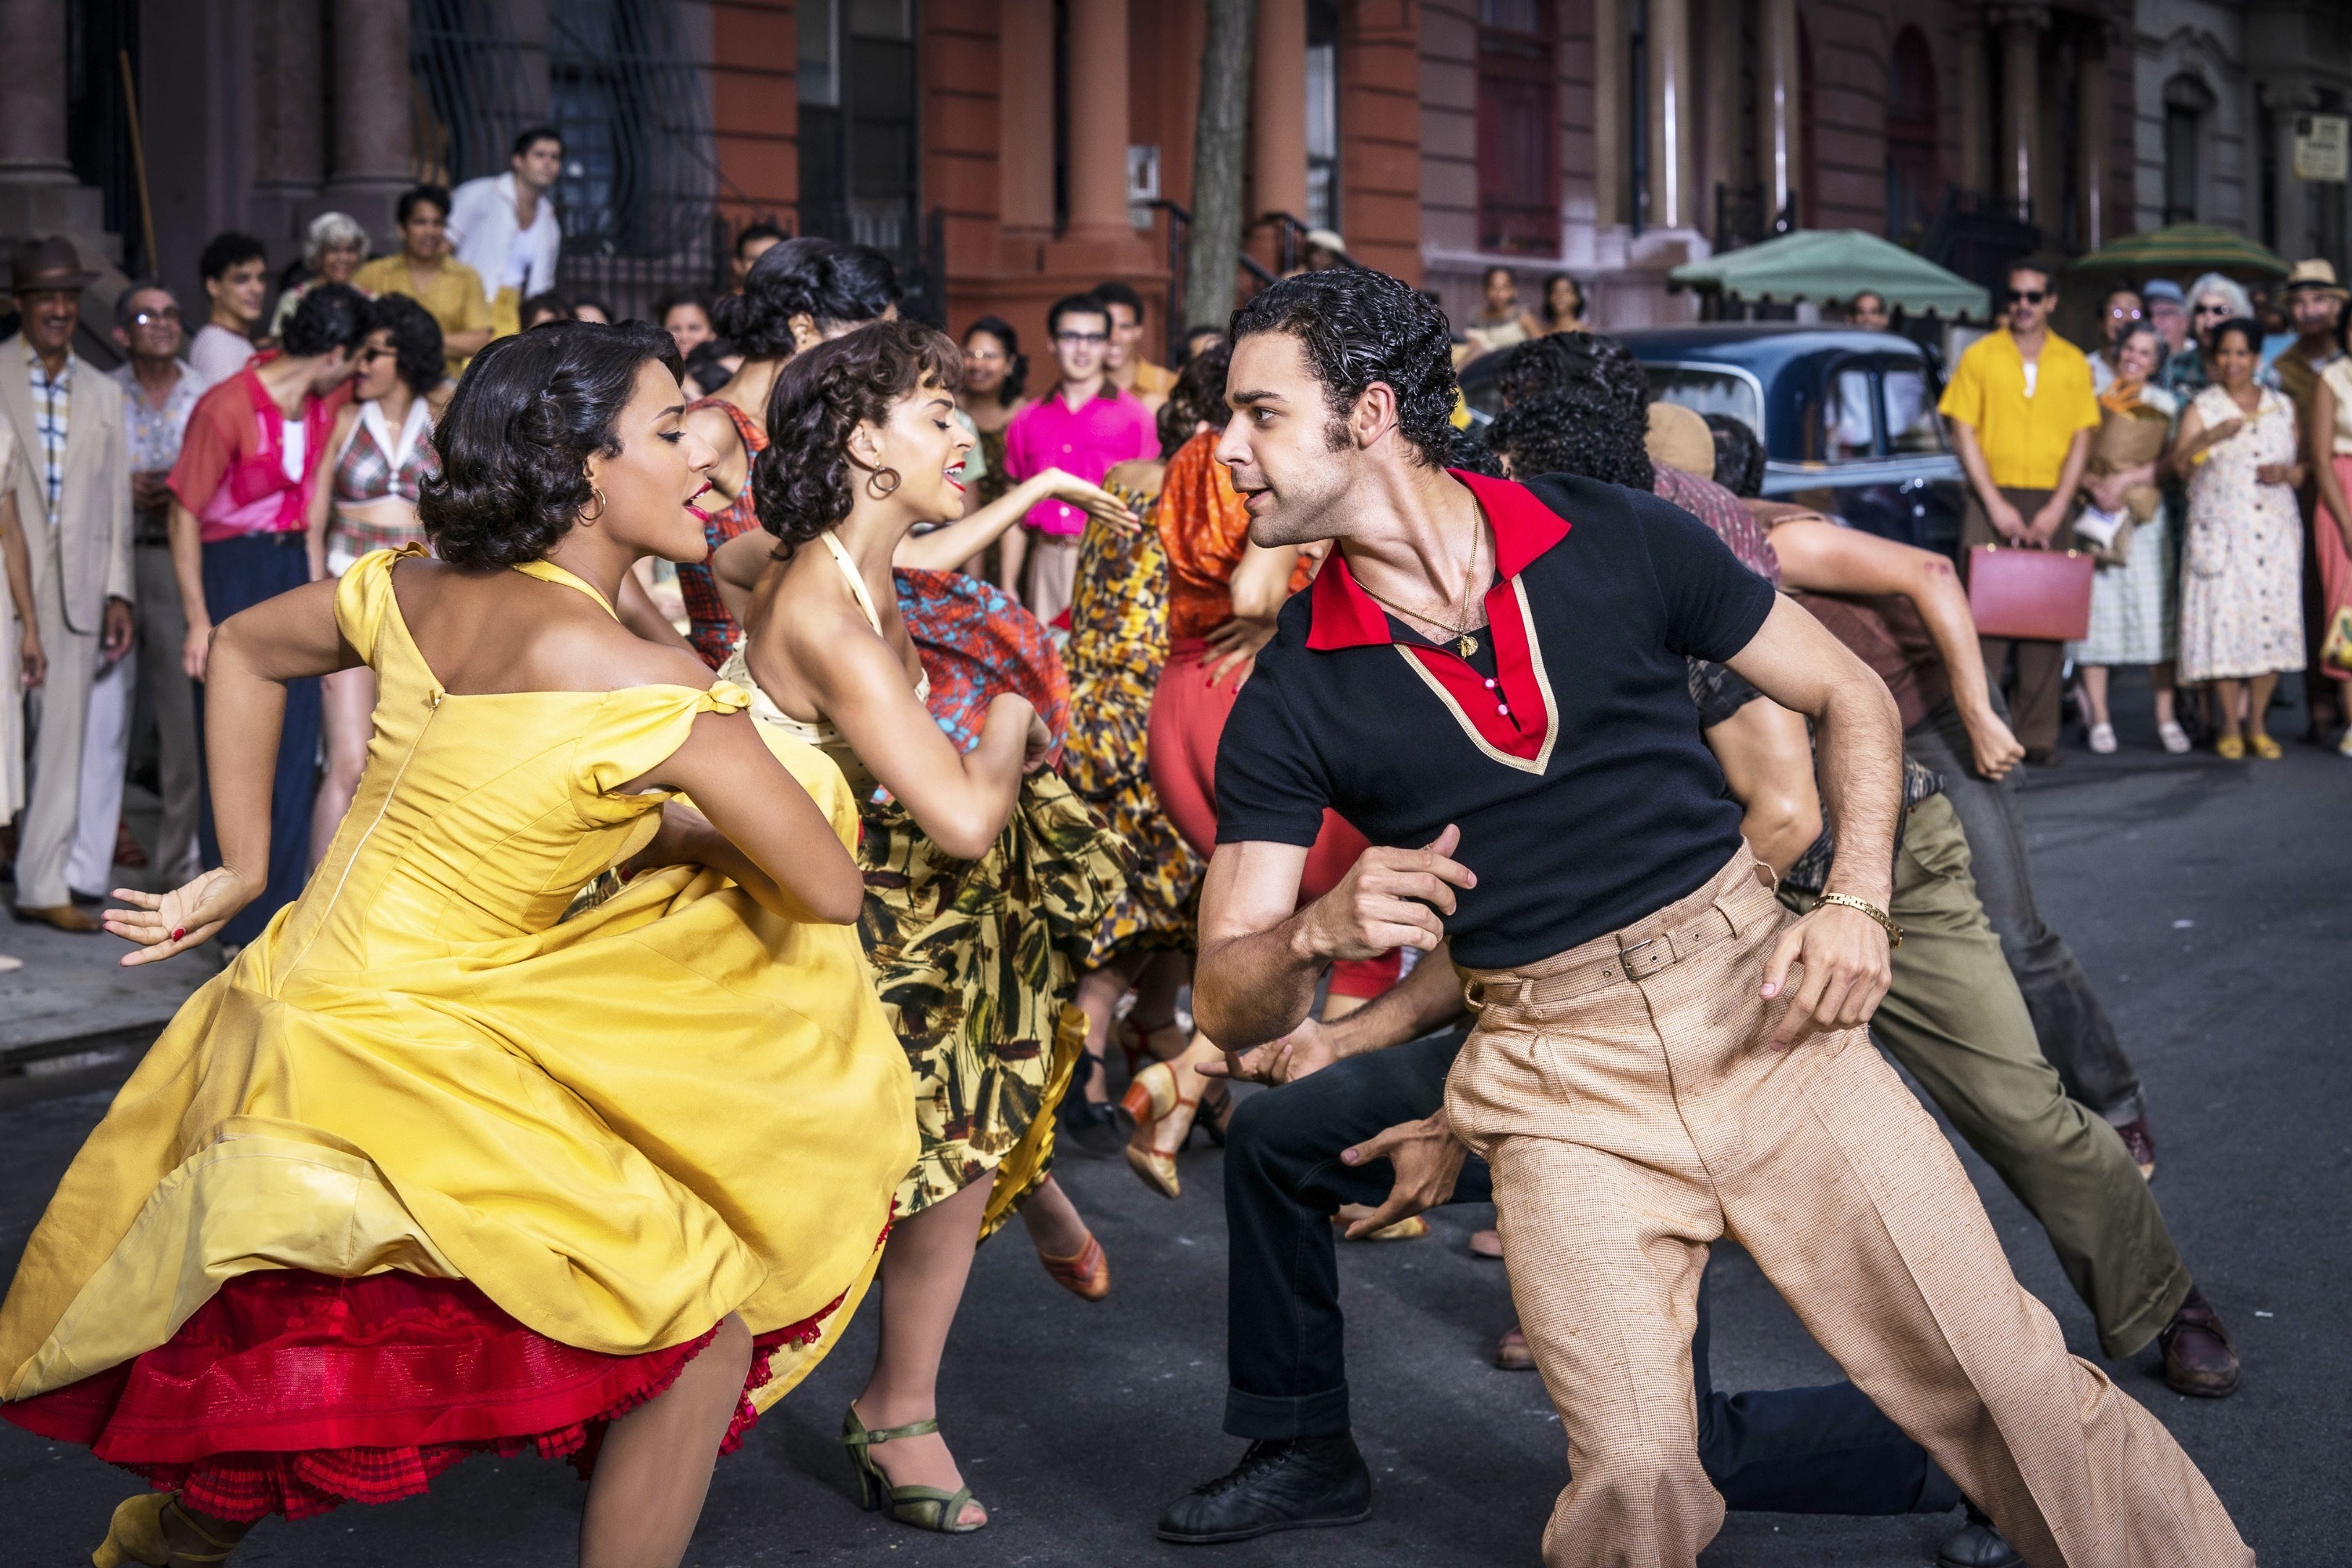 A crowd of people dance in colorful clothing